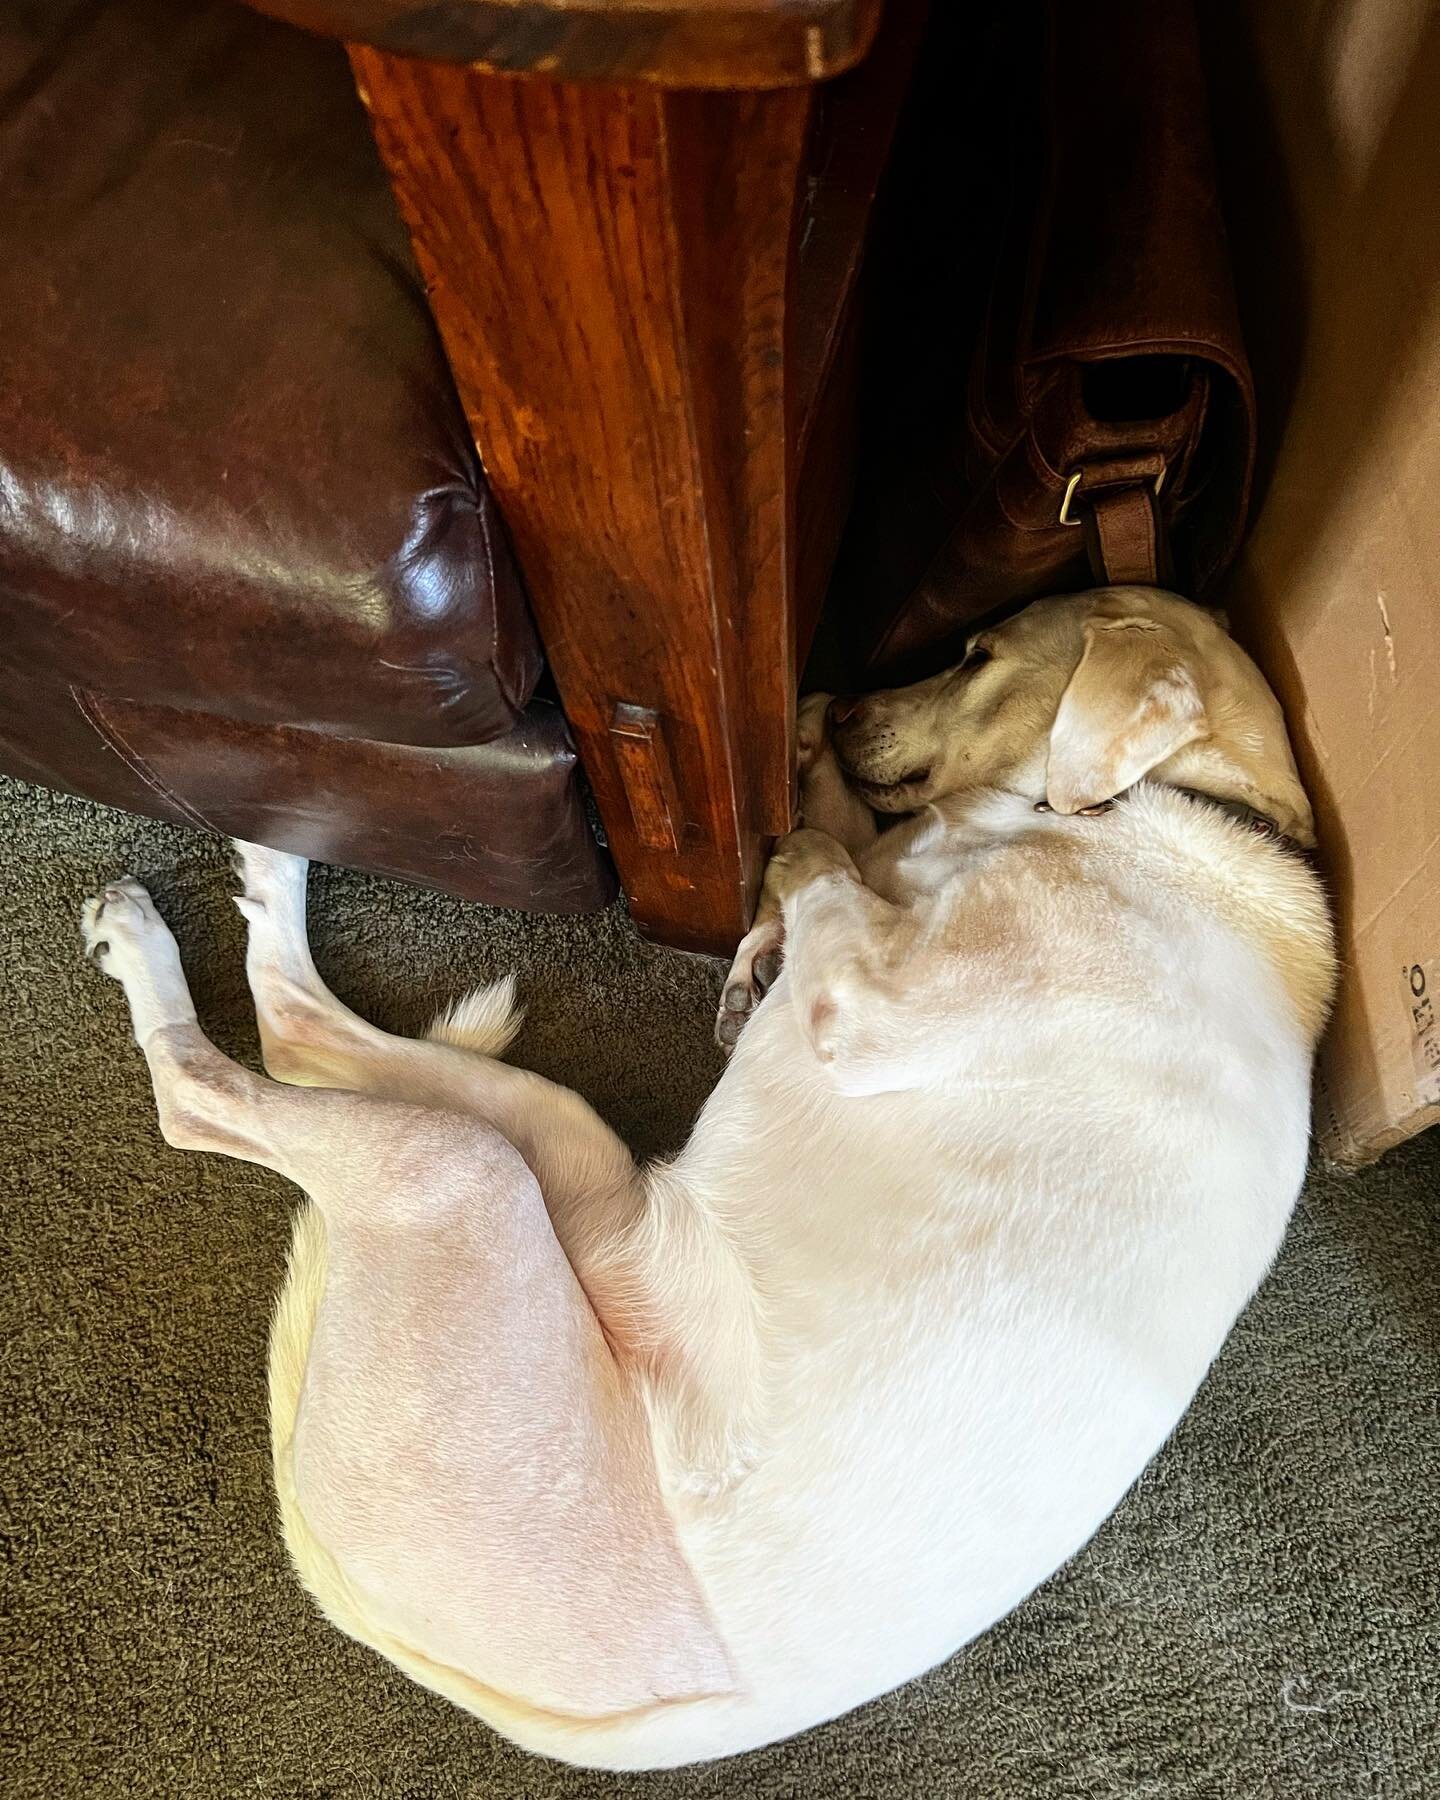 The healing continues for Jaz. She isn&rsquo;t allowed to do much for at least four weeks, so she chills in my office with me.

Yesterday I found her like this, and with plenty of open floor to lay on, this choice made me giggle. Her hair is growing 